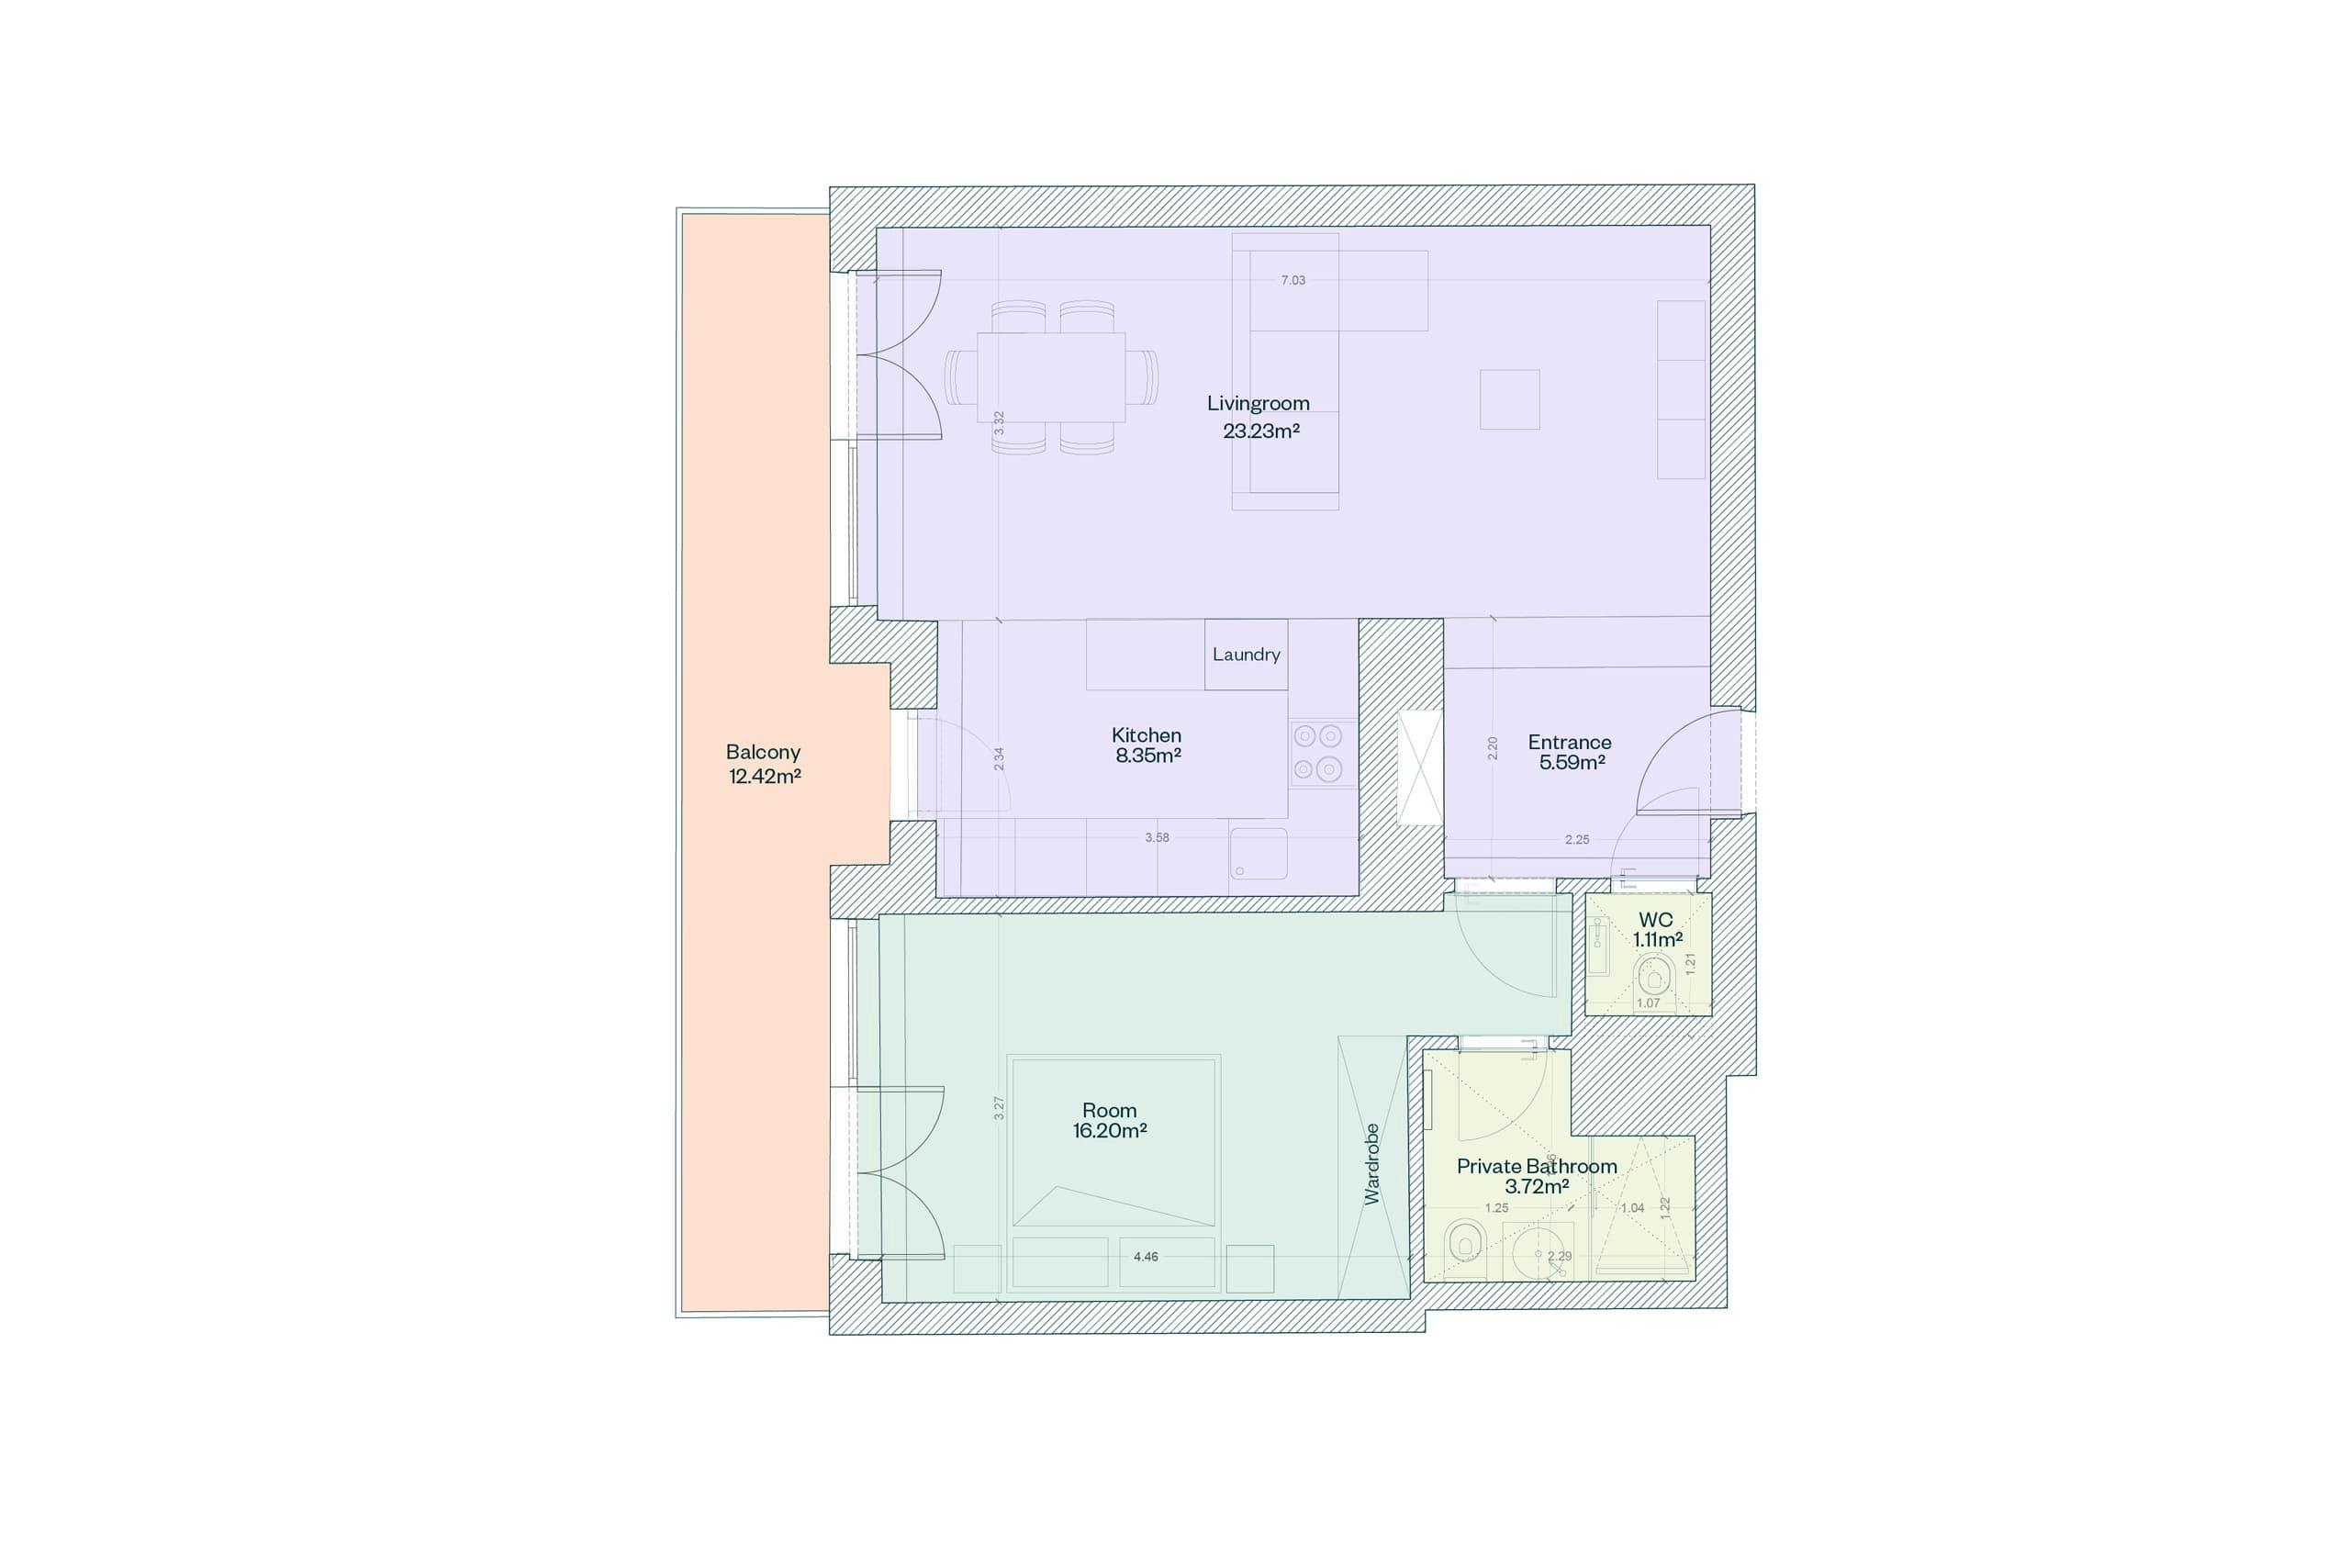 Visual guide floor plan for apartment Moselle at Hamilius apartments in the centre of Luxembourg. The plan show the layout of the one bedroom apartment's living area, bedroom and bathroom and additional separate toilet.  It also shows a large full-length balcony that goes from the bedroom to living area.